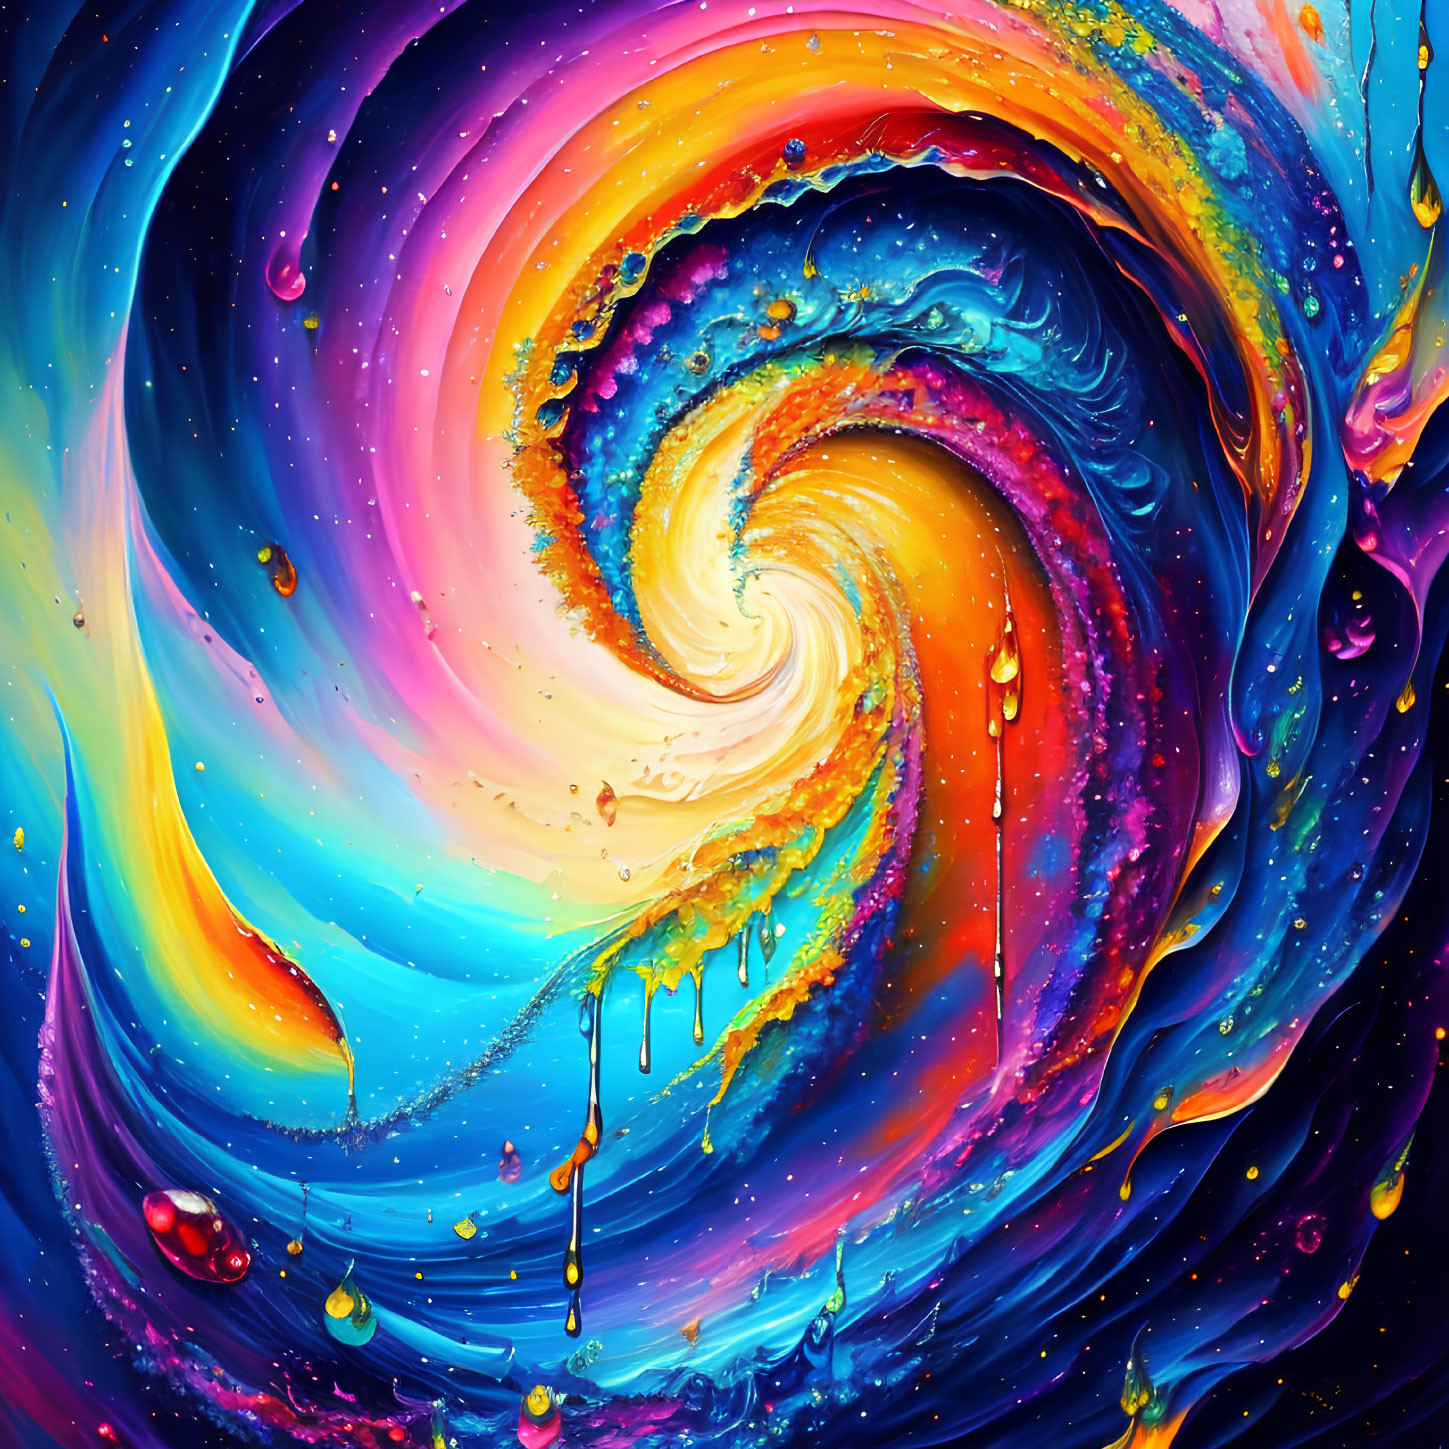 Colorful Abstract Swirl with Blue, Yellow, and Pink Hues